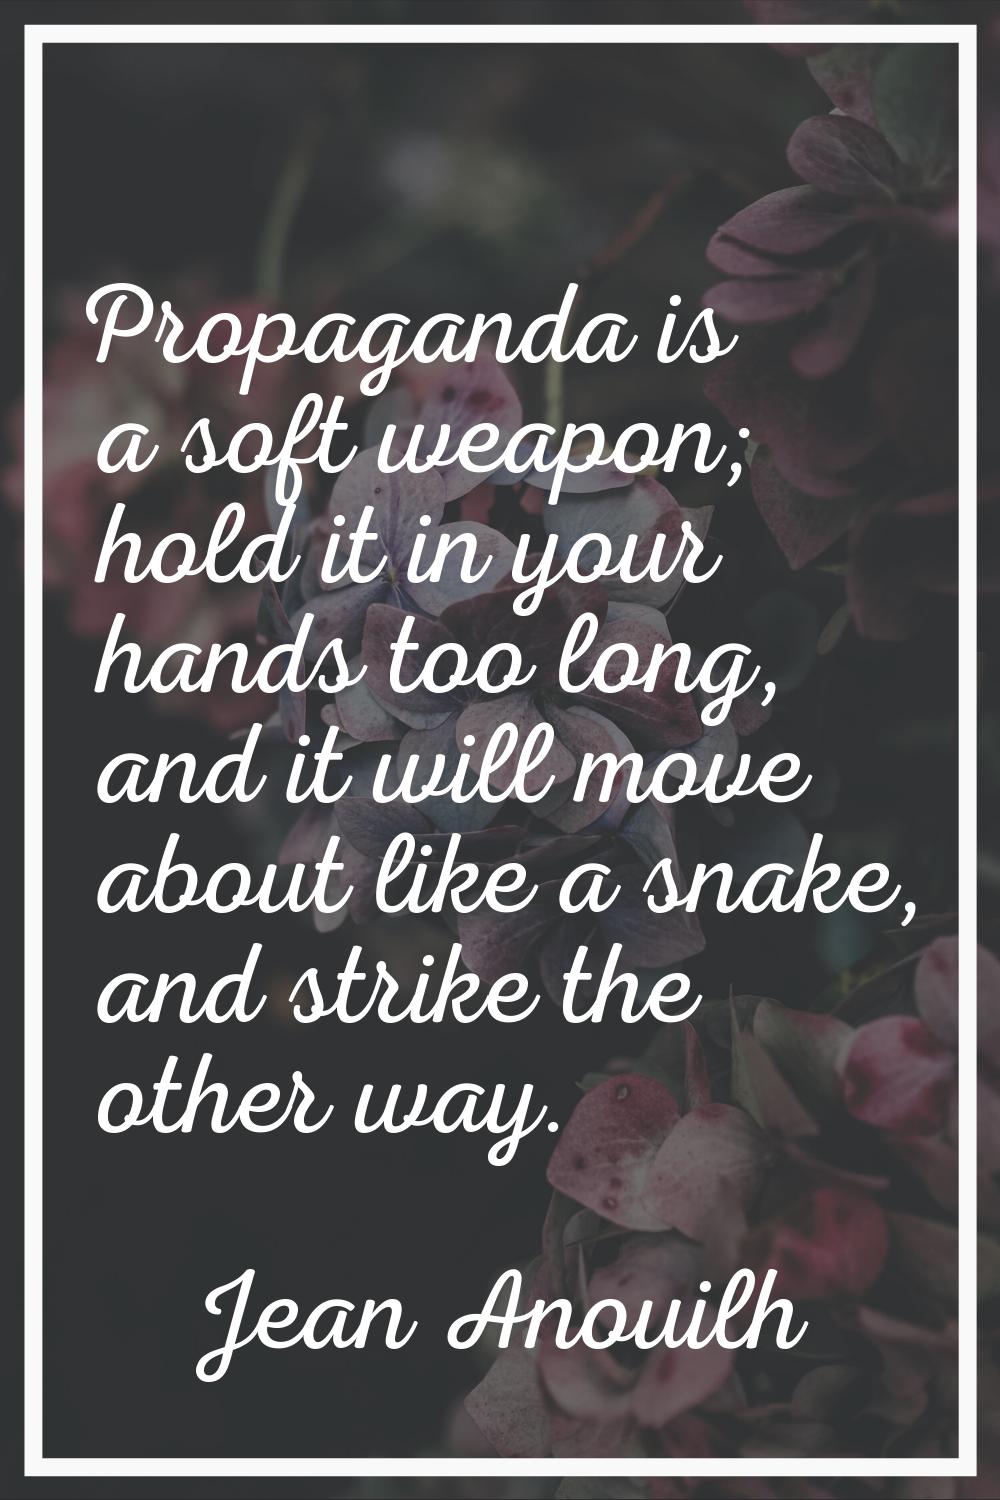 Propaganda is a soft weapon; hold it in your hands too long, and it will move about like a snake, a